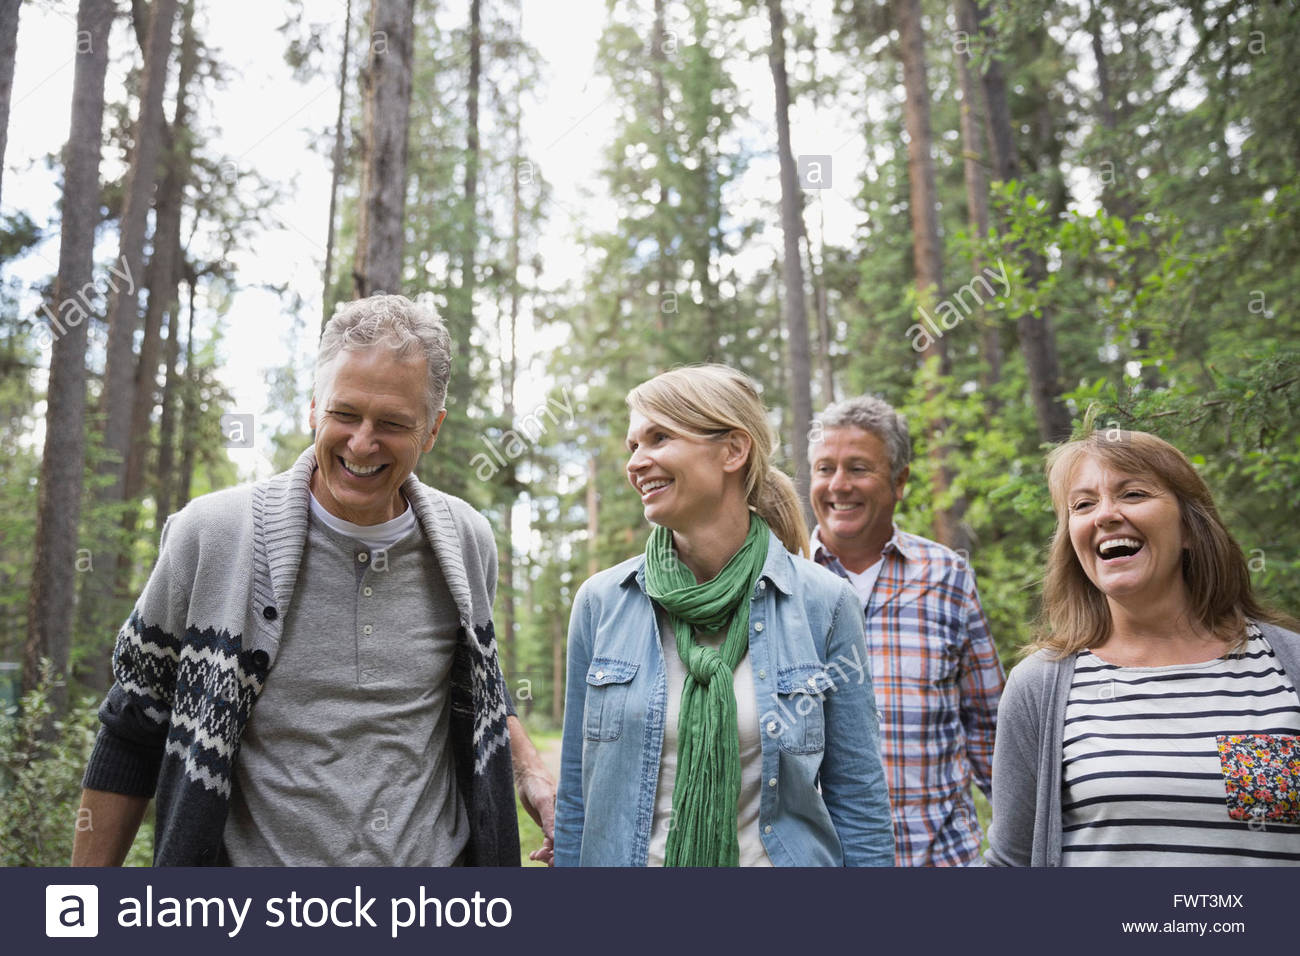 Middle-aged friends walking through the forest Stock Photo